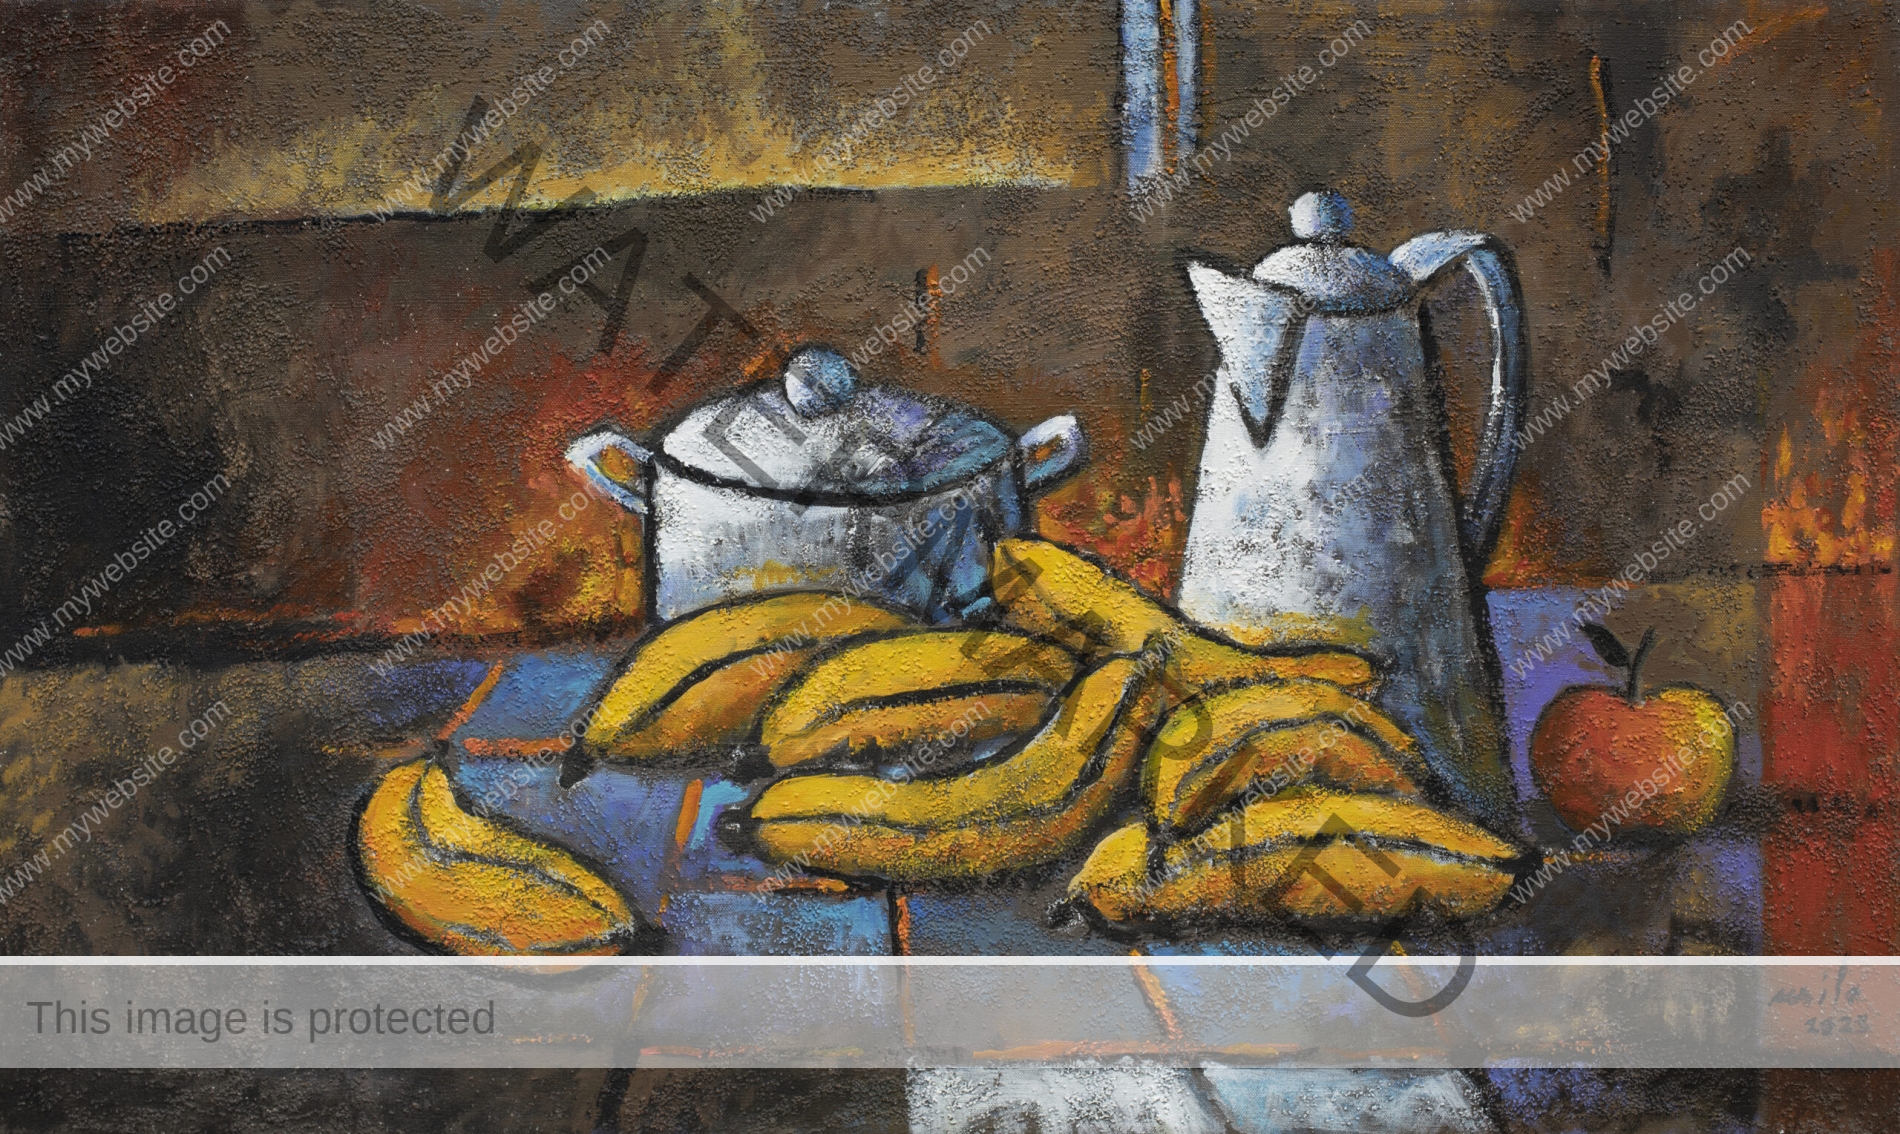 Rustic still life painting by Milo Gonzalez, featuring plantain scattered on a table with a pot and kettle. It's a cosy interior setting, creating the atmosphere of domesticity.